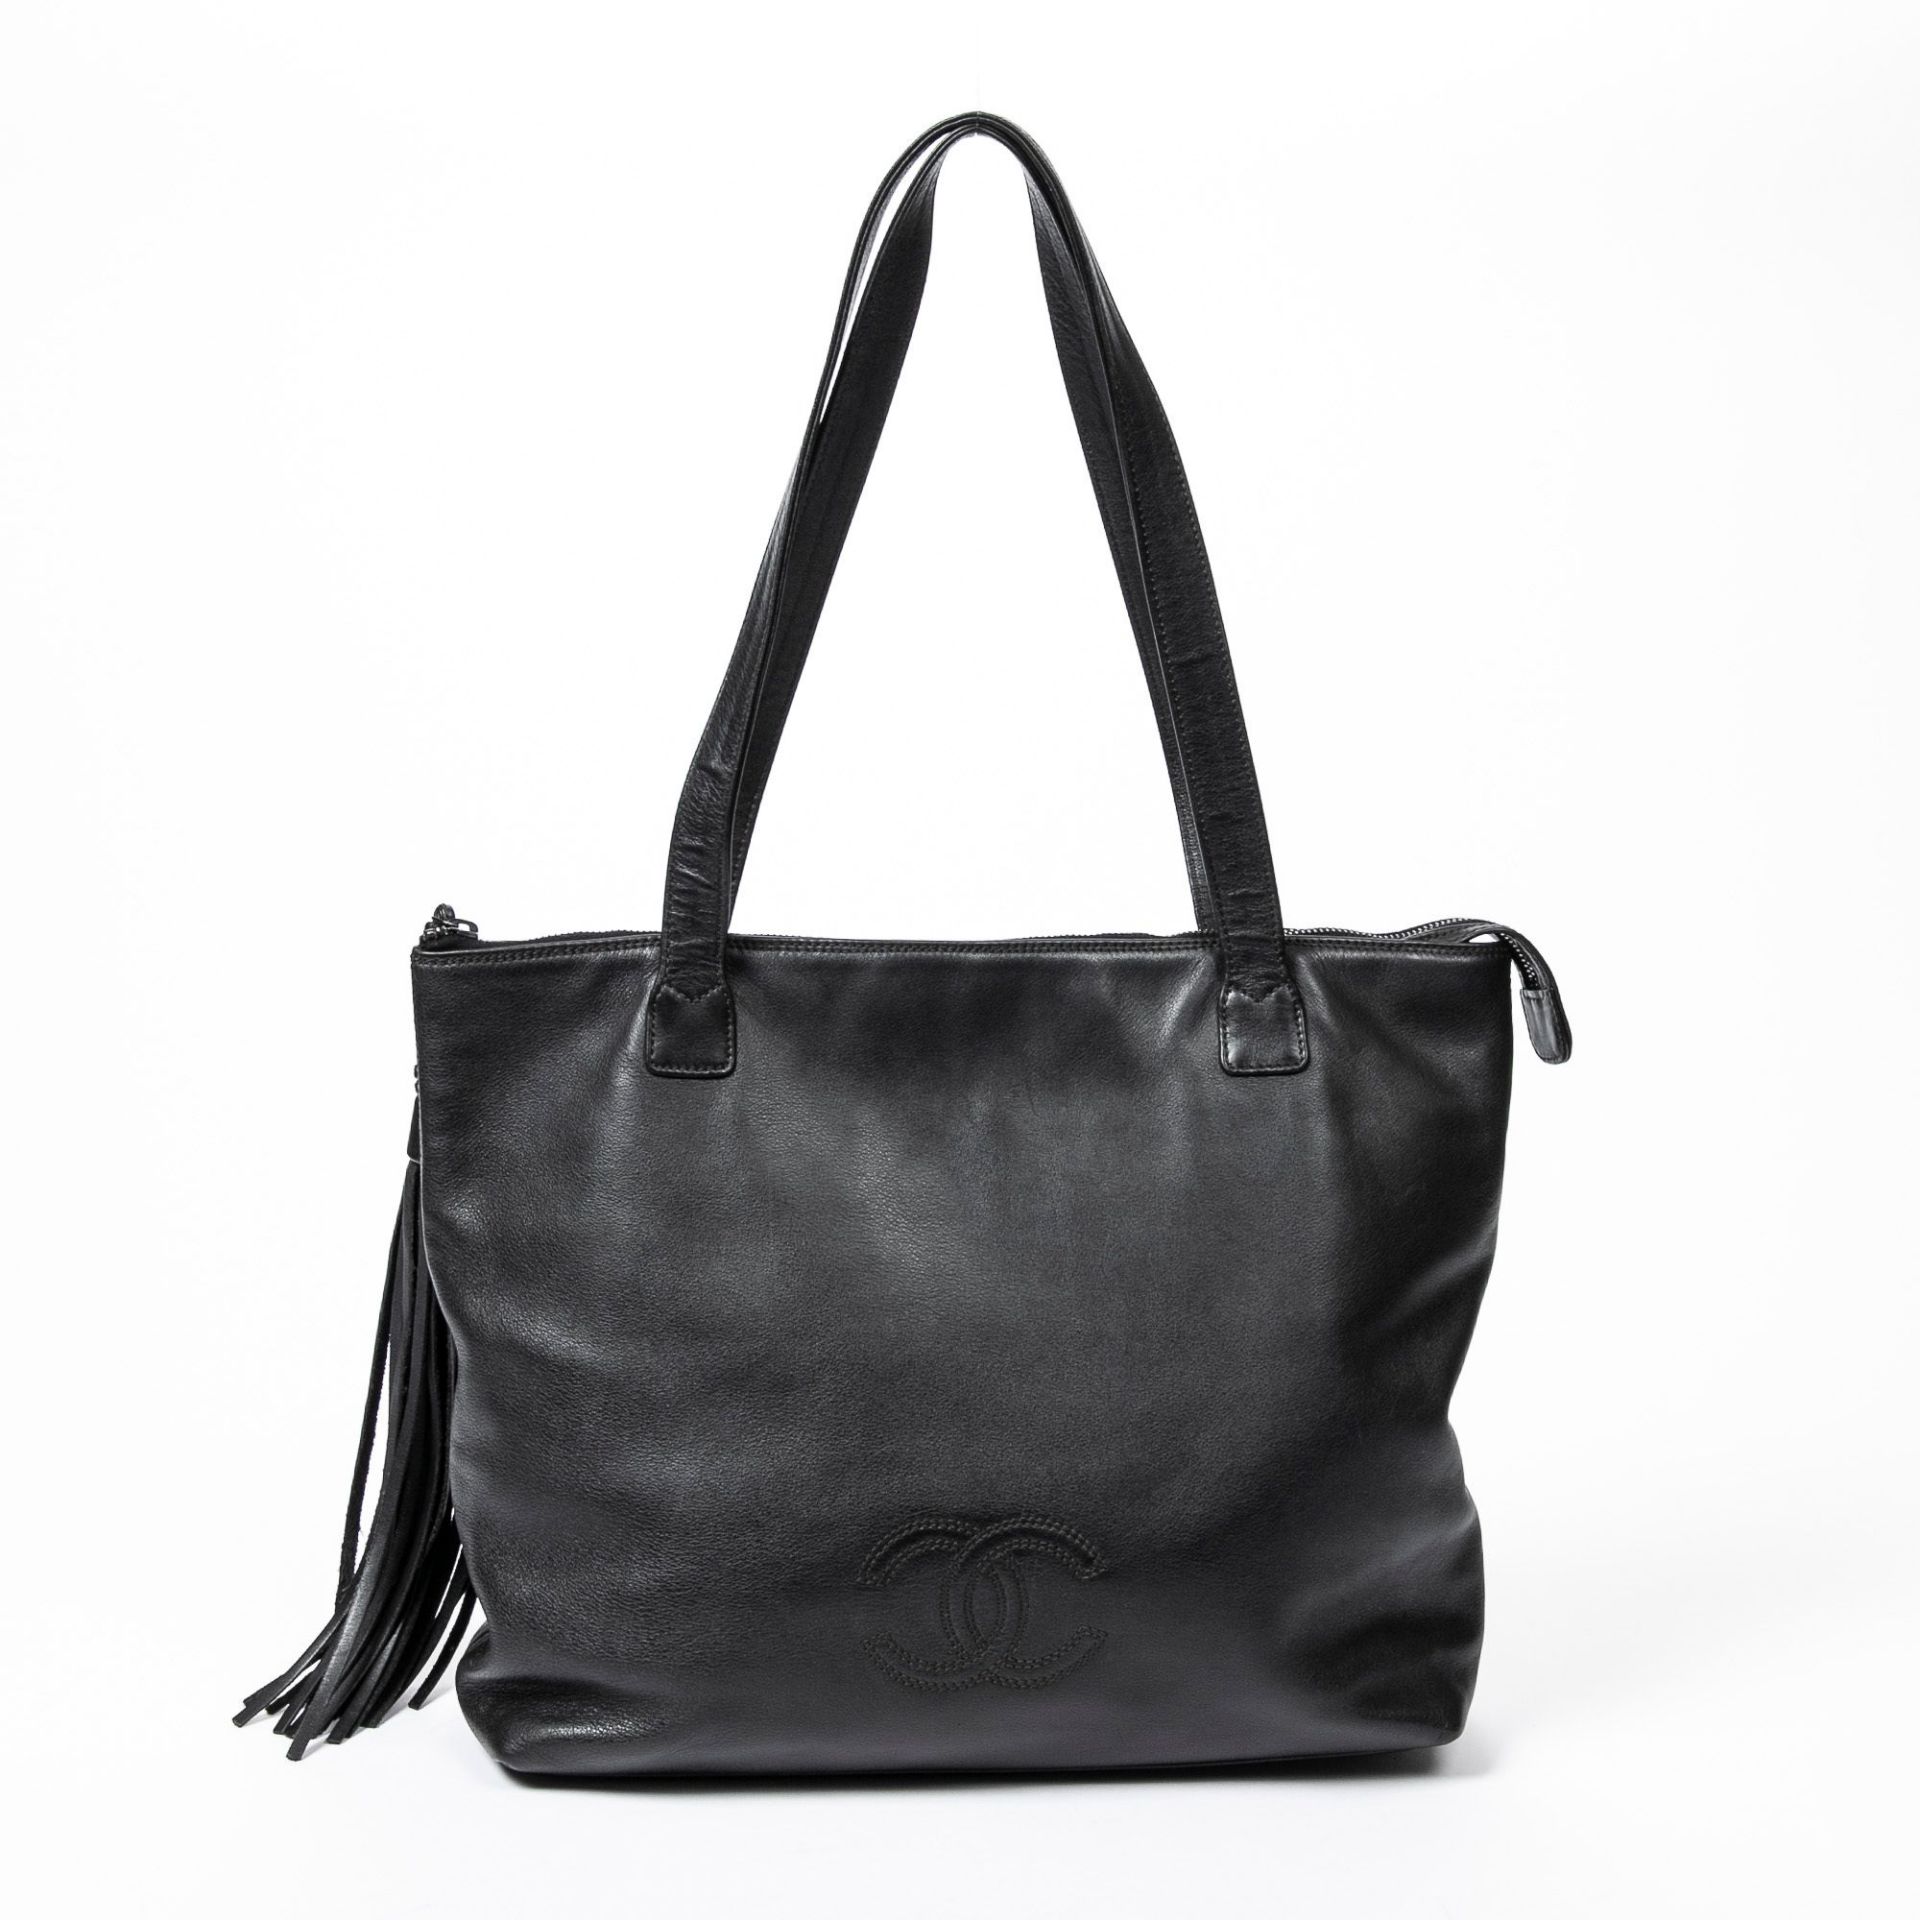 RRP £2800 Chanel Large Tassel Tote in Black AAO5533 - Grade A Please Contact Us Directly For